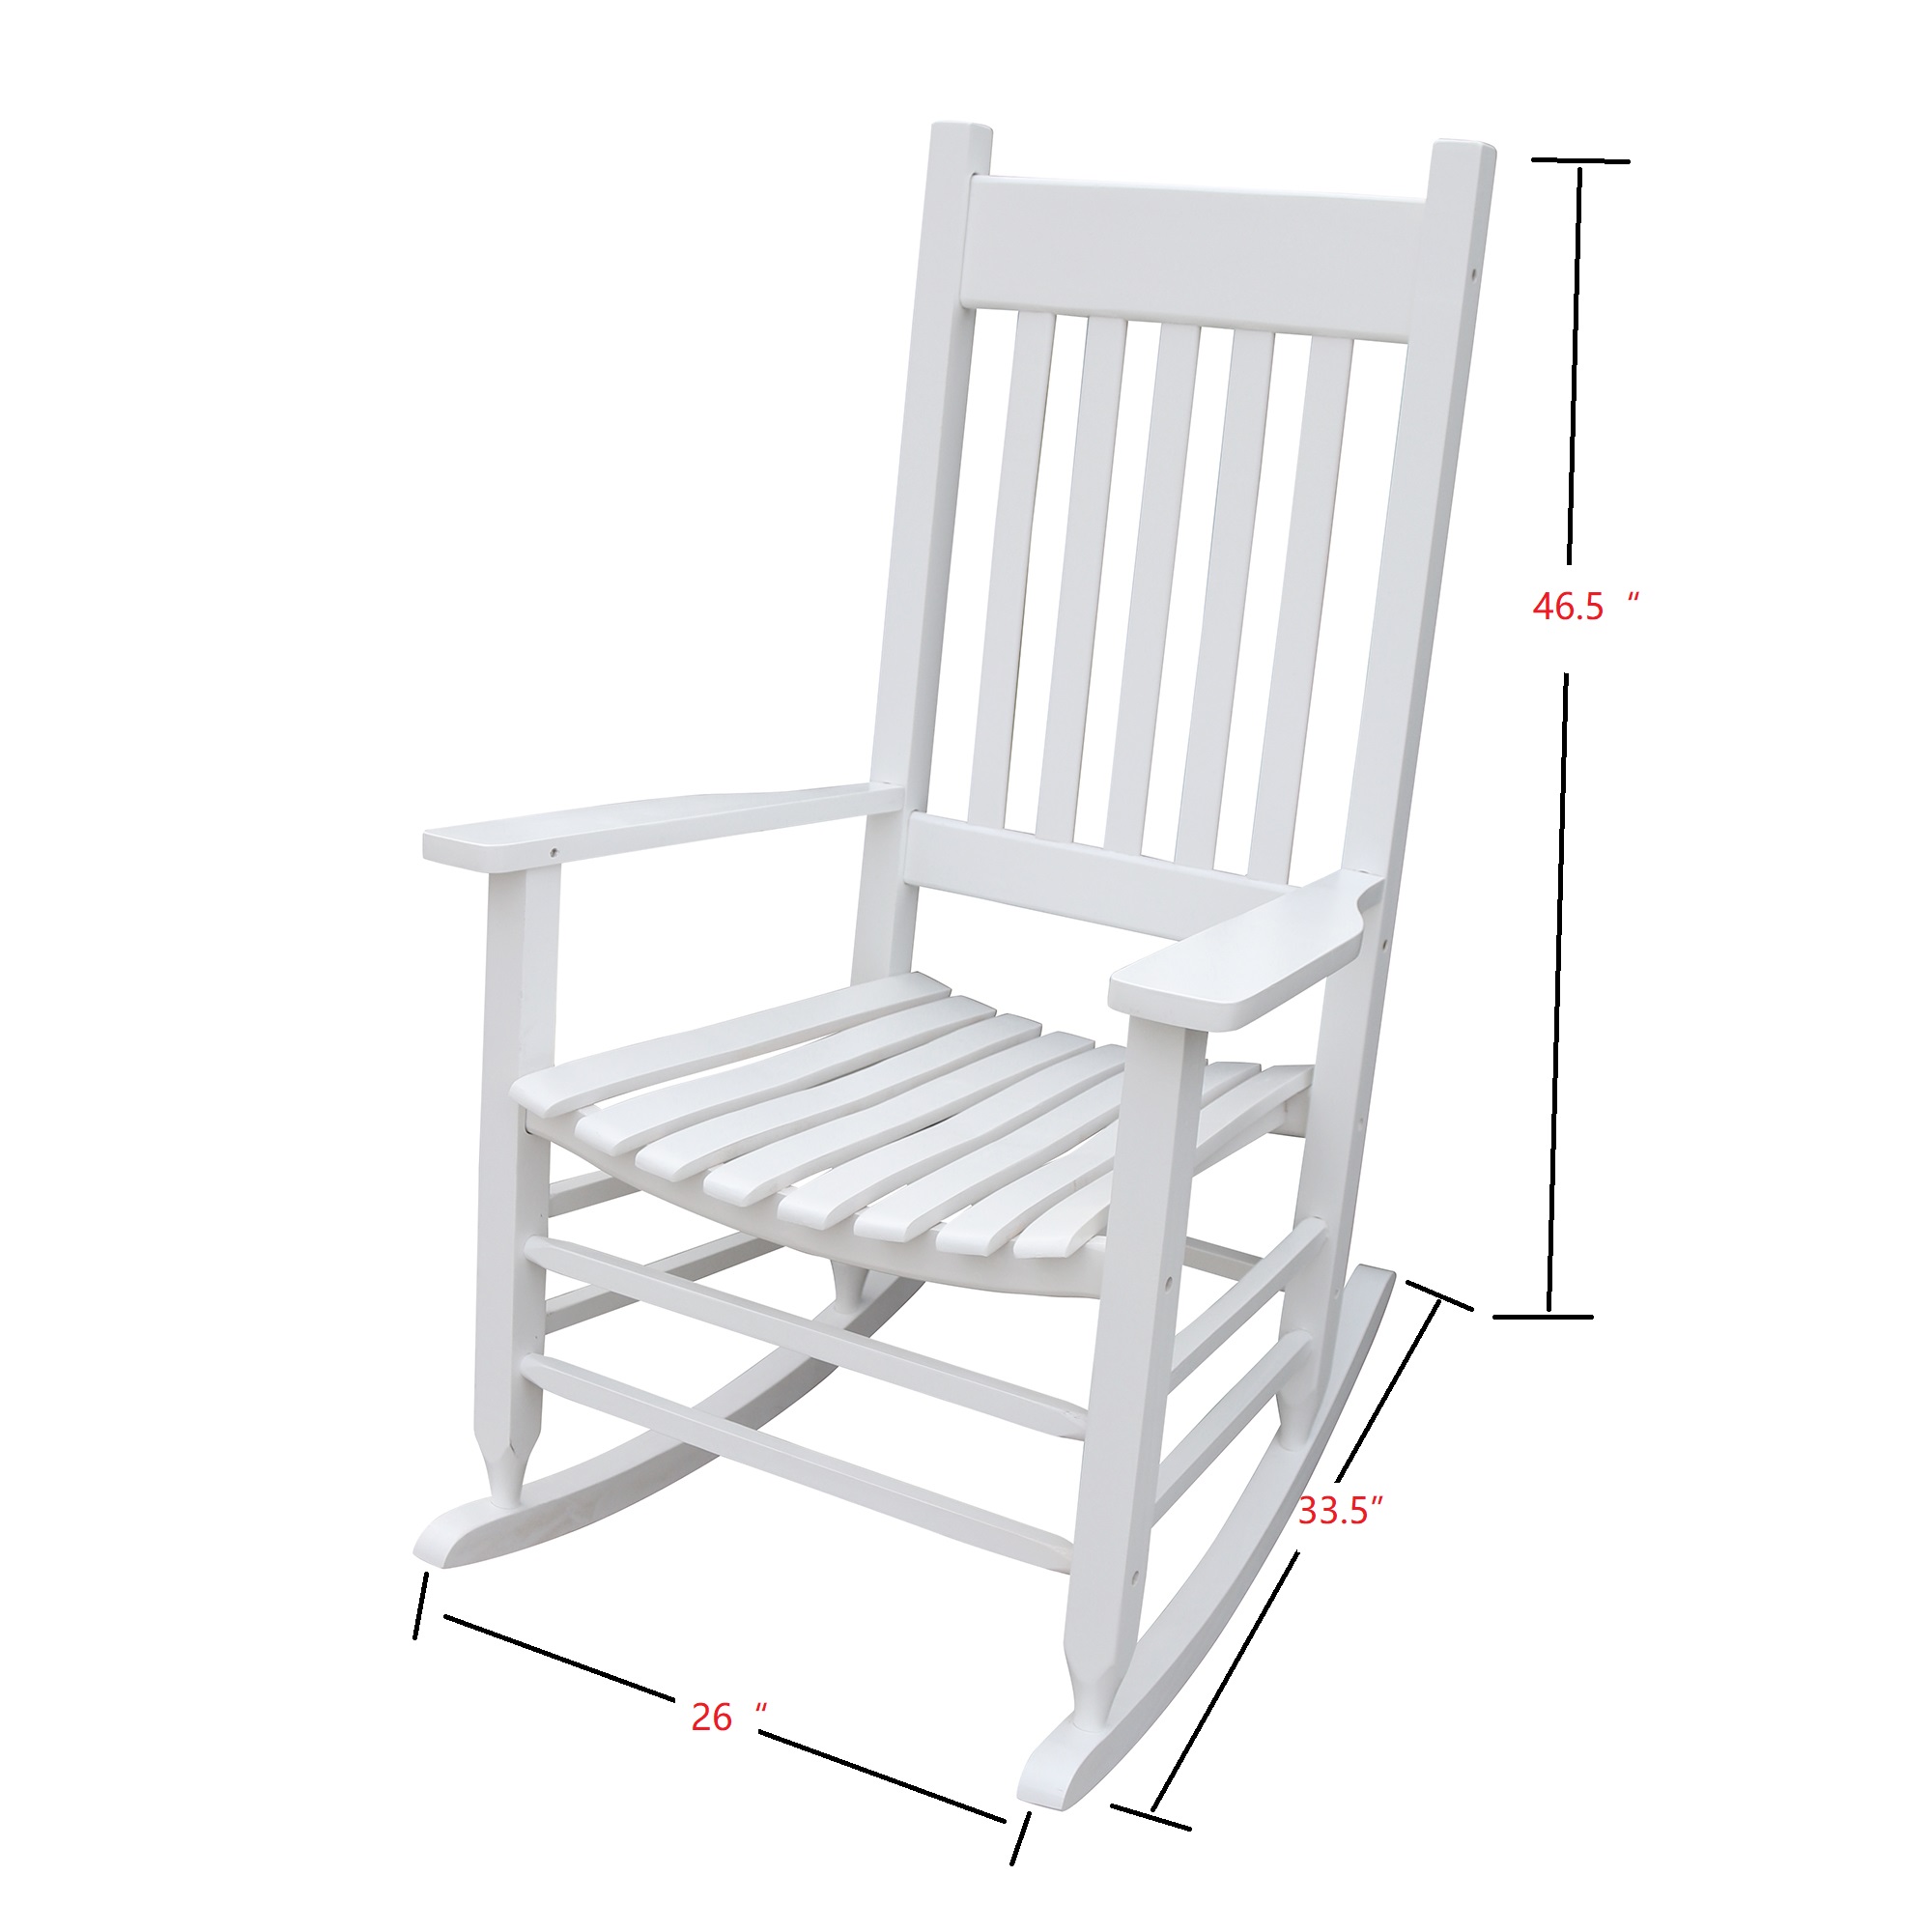 Rocking Chair for Outdoor, Wooden Patio Porch Rocker Chair with Back Support, Ergonomic Wooden Rocking Chair for Patio Porch Backyard, Rocking Bistro Chair Patio Chairs, Max 280lbs, White, A1602 - image 2 of 7